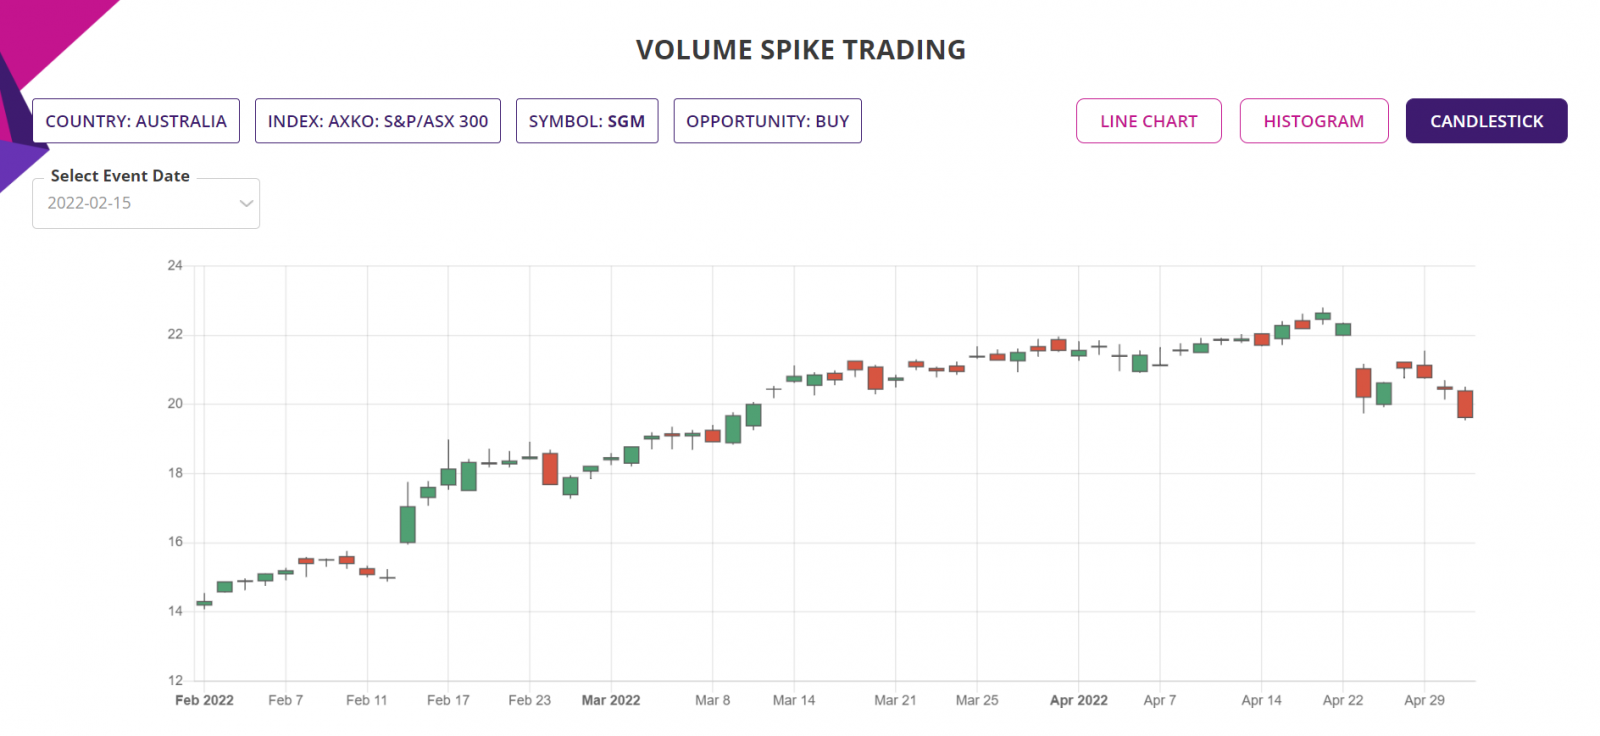 Volume spike trading strategy, detailed report, trade performance, Candlestick chart, ASX Stocks